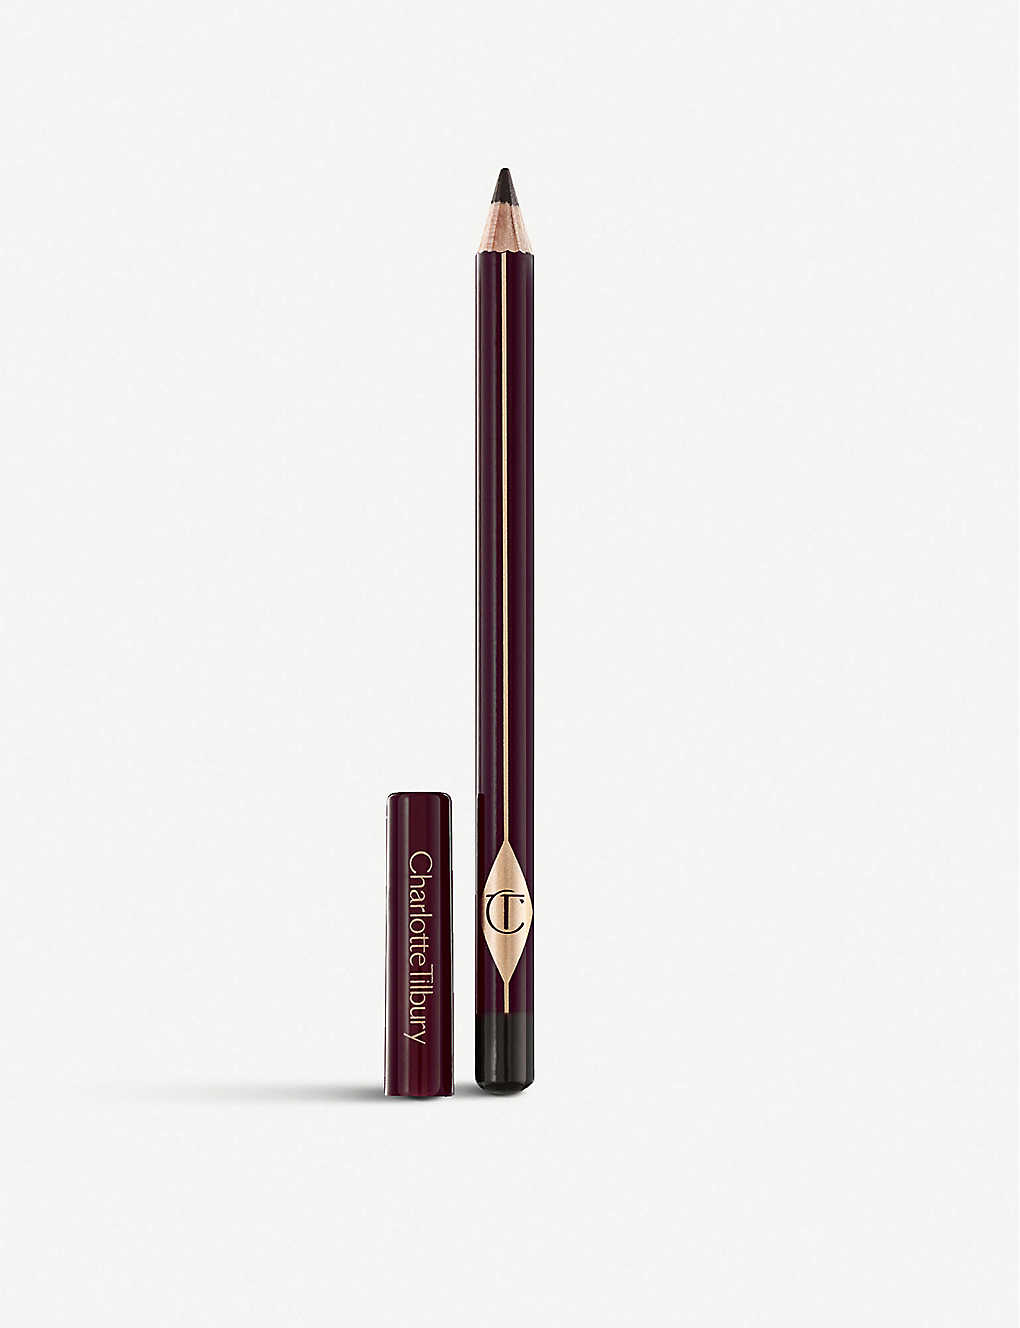 Charlotte Tilbury The Classic Eyeliner Pencil 10g In Classic Brown